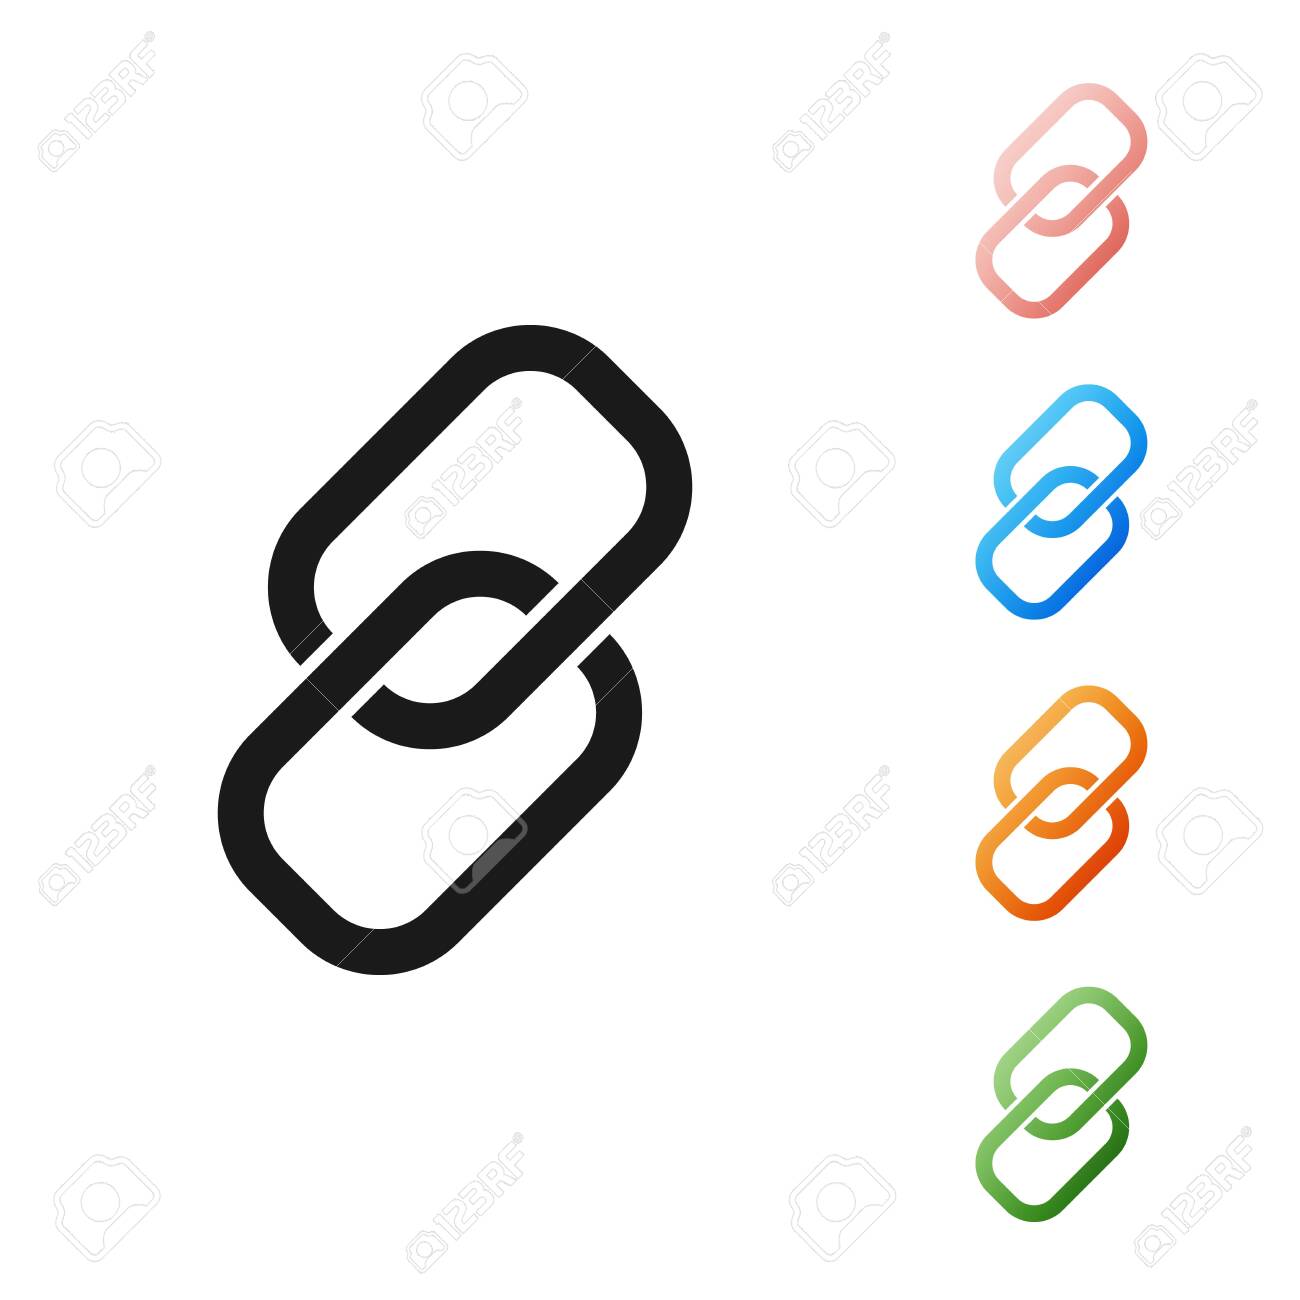 Black Chain Link Icon Isolated On White Background Single